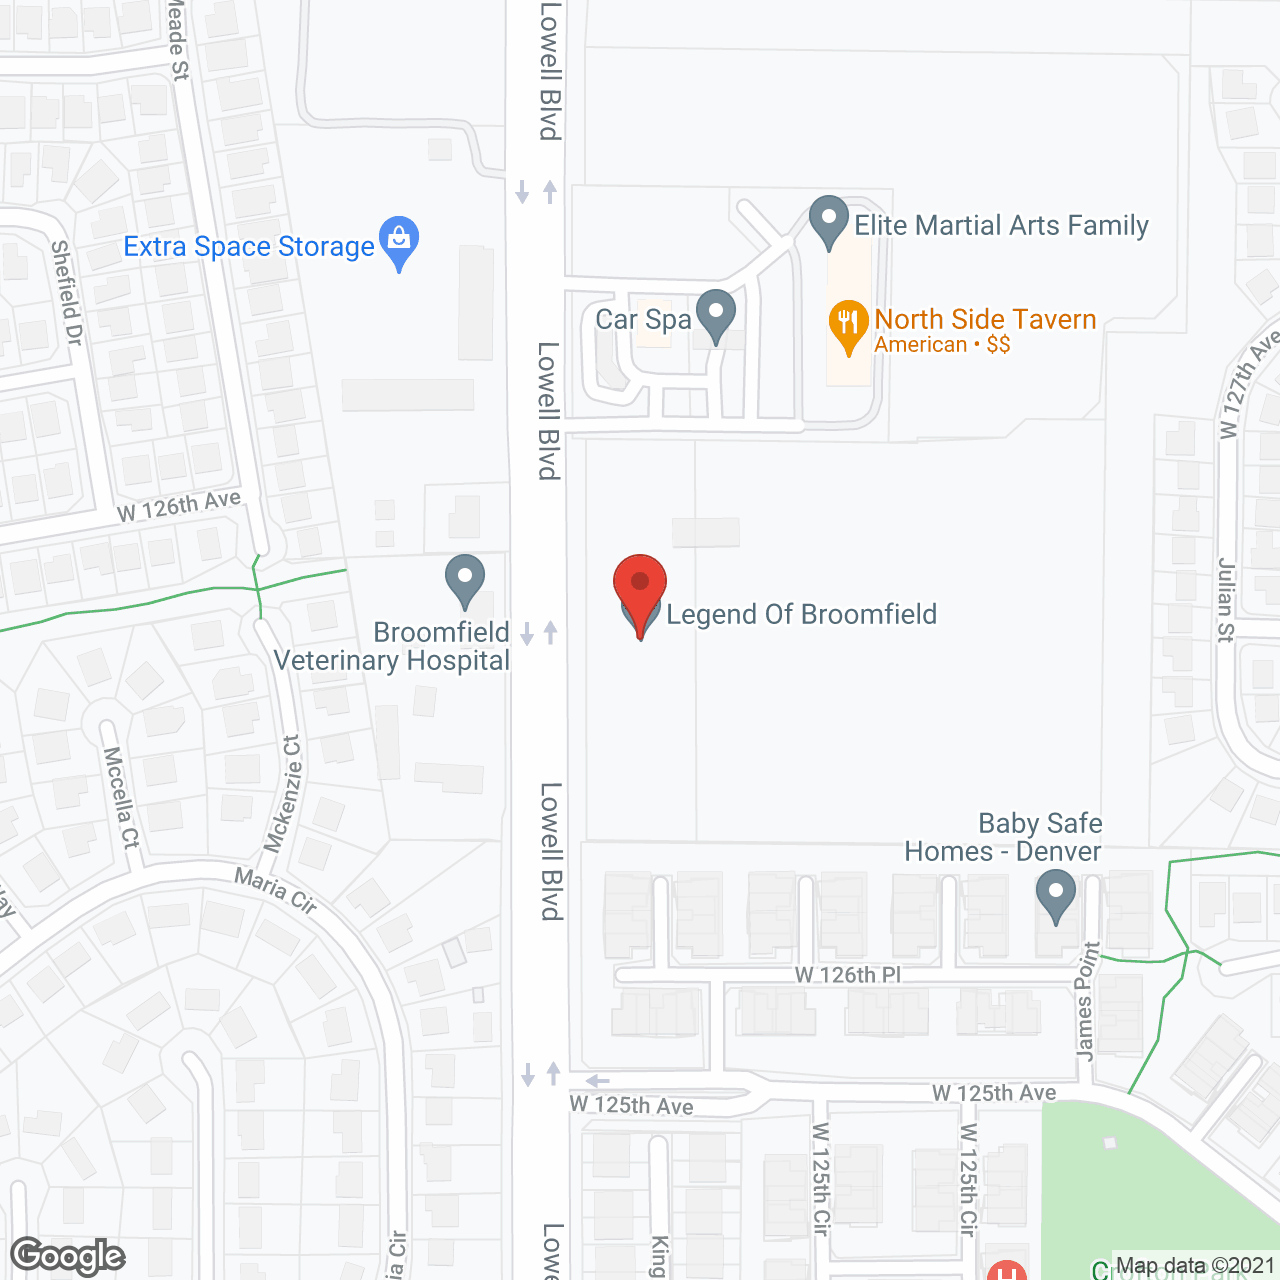 Legend at Broomfield in google map